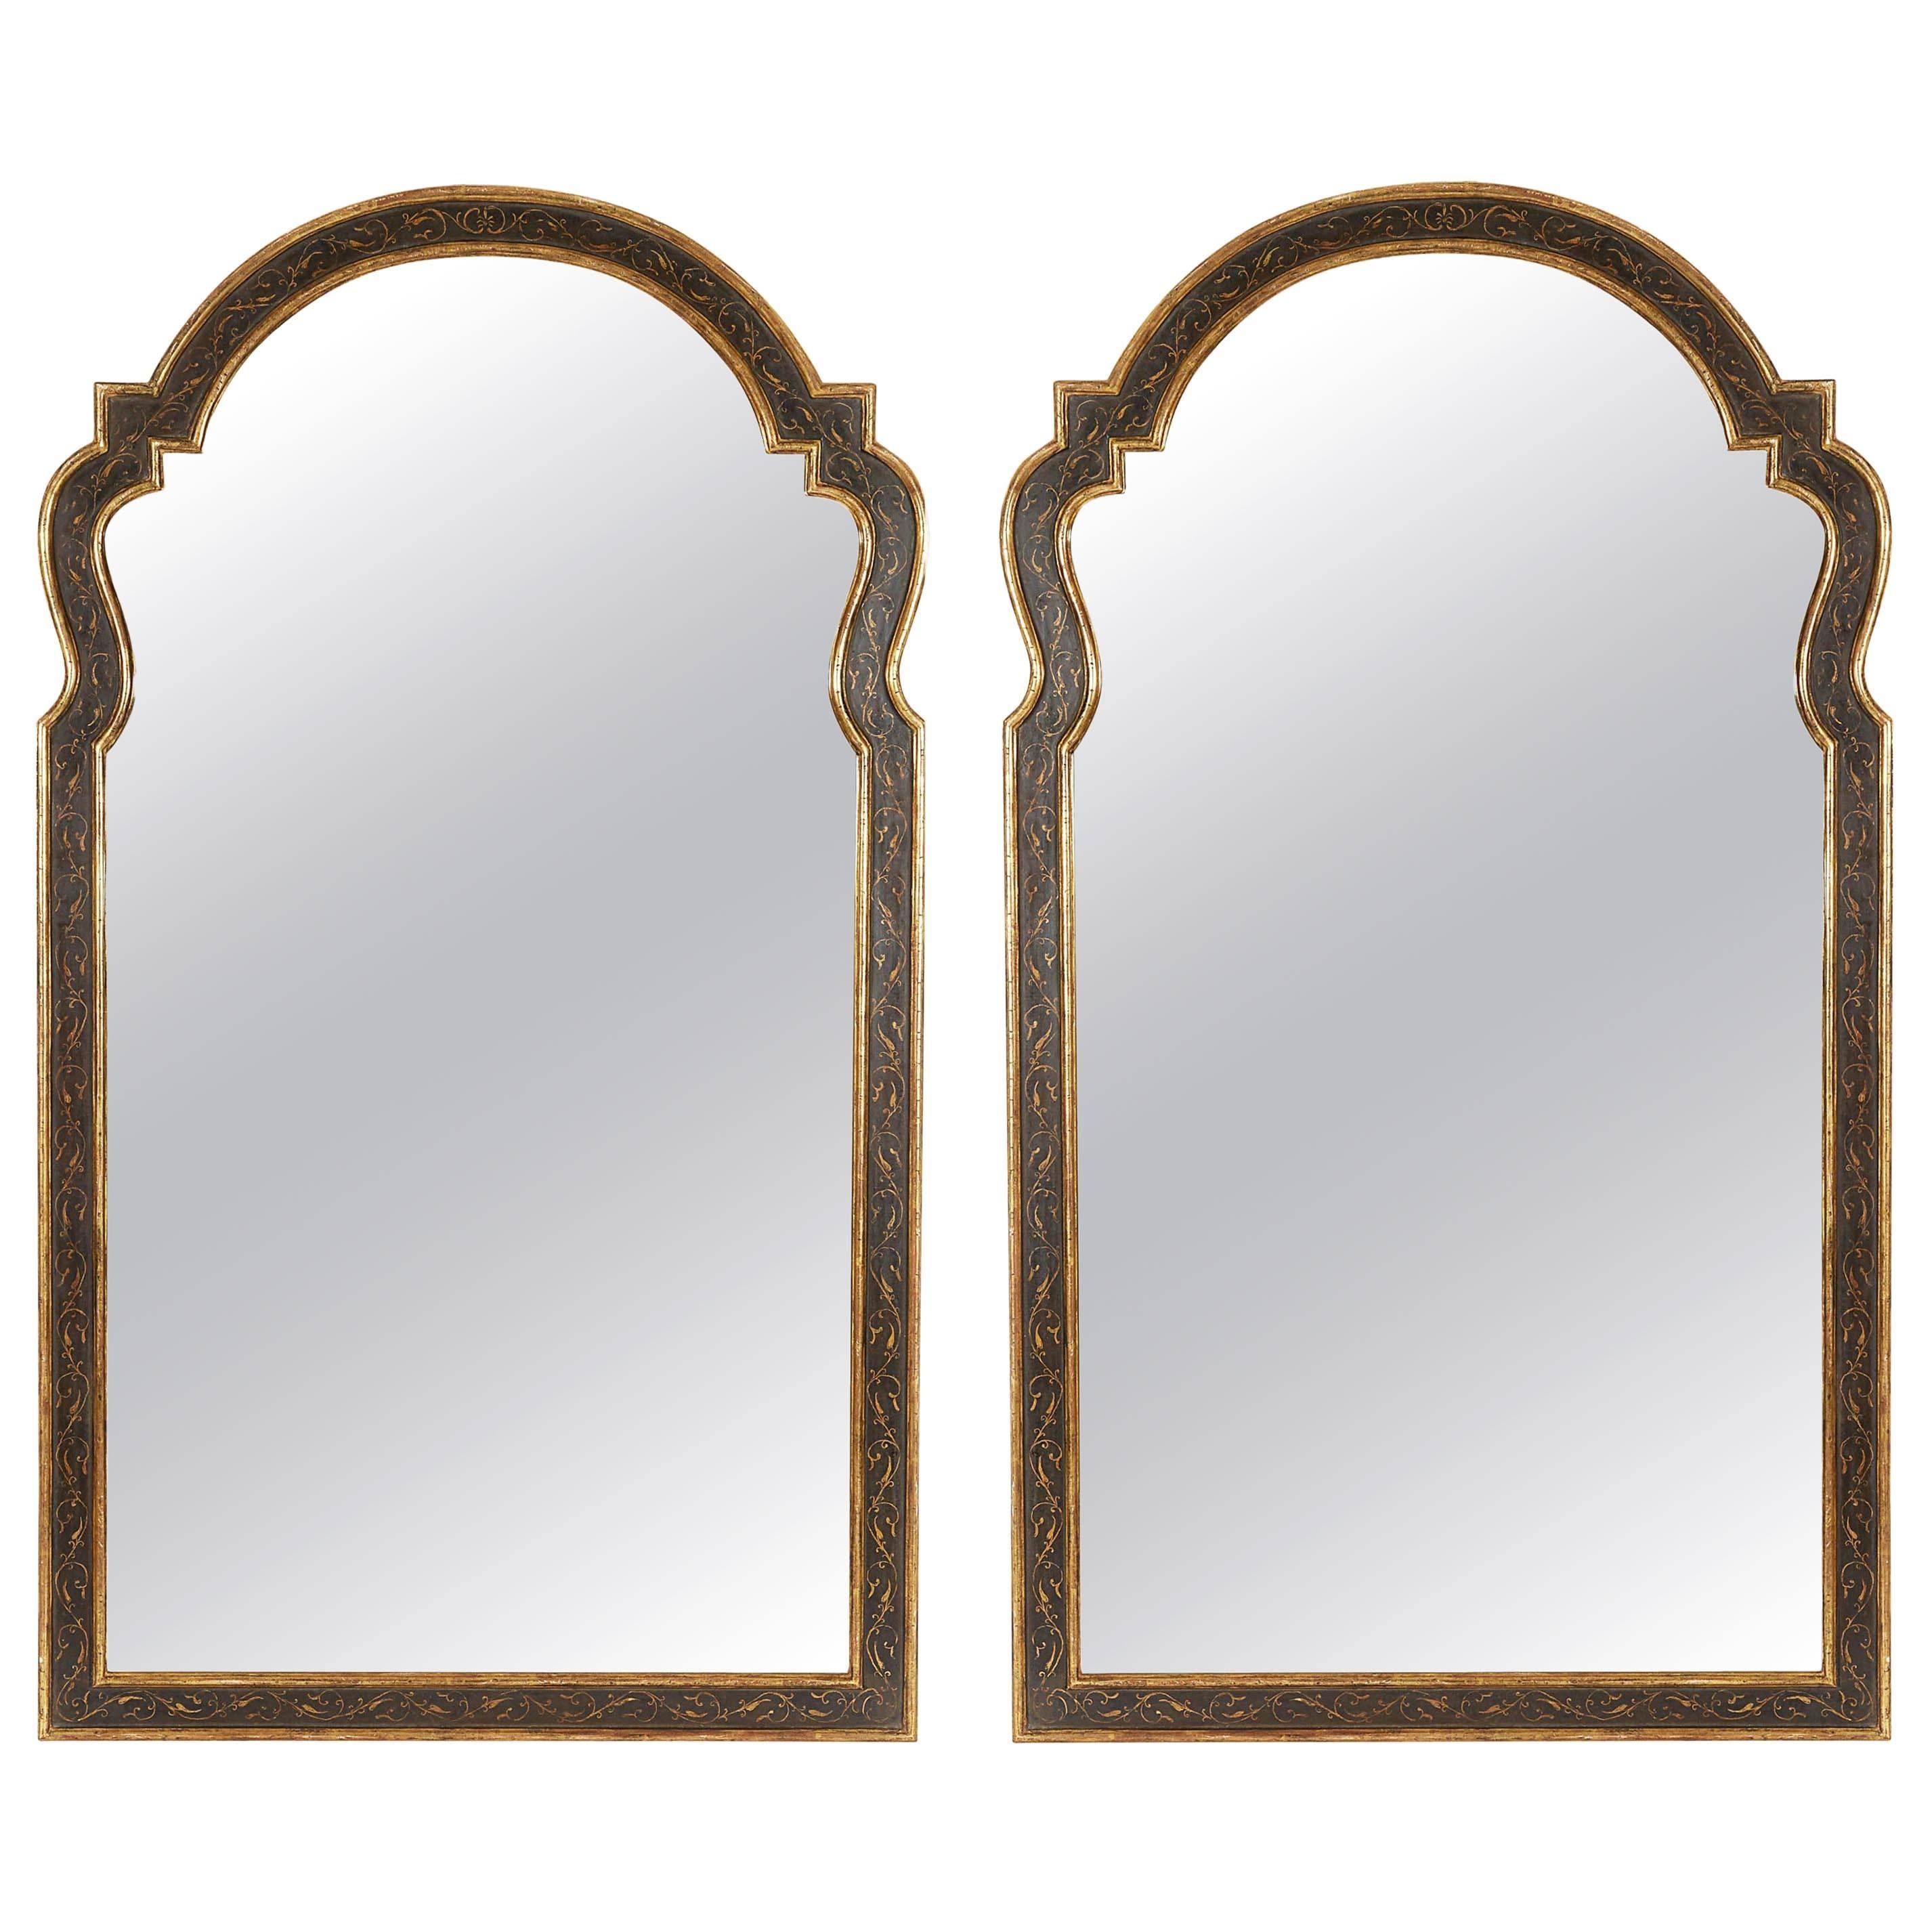 Large Pair of Queen Anne Style Black and Gilt Mirrors